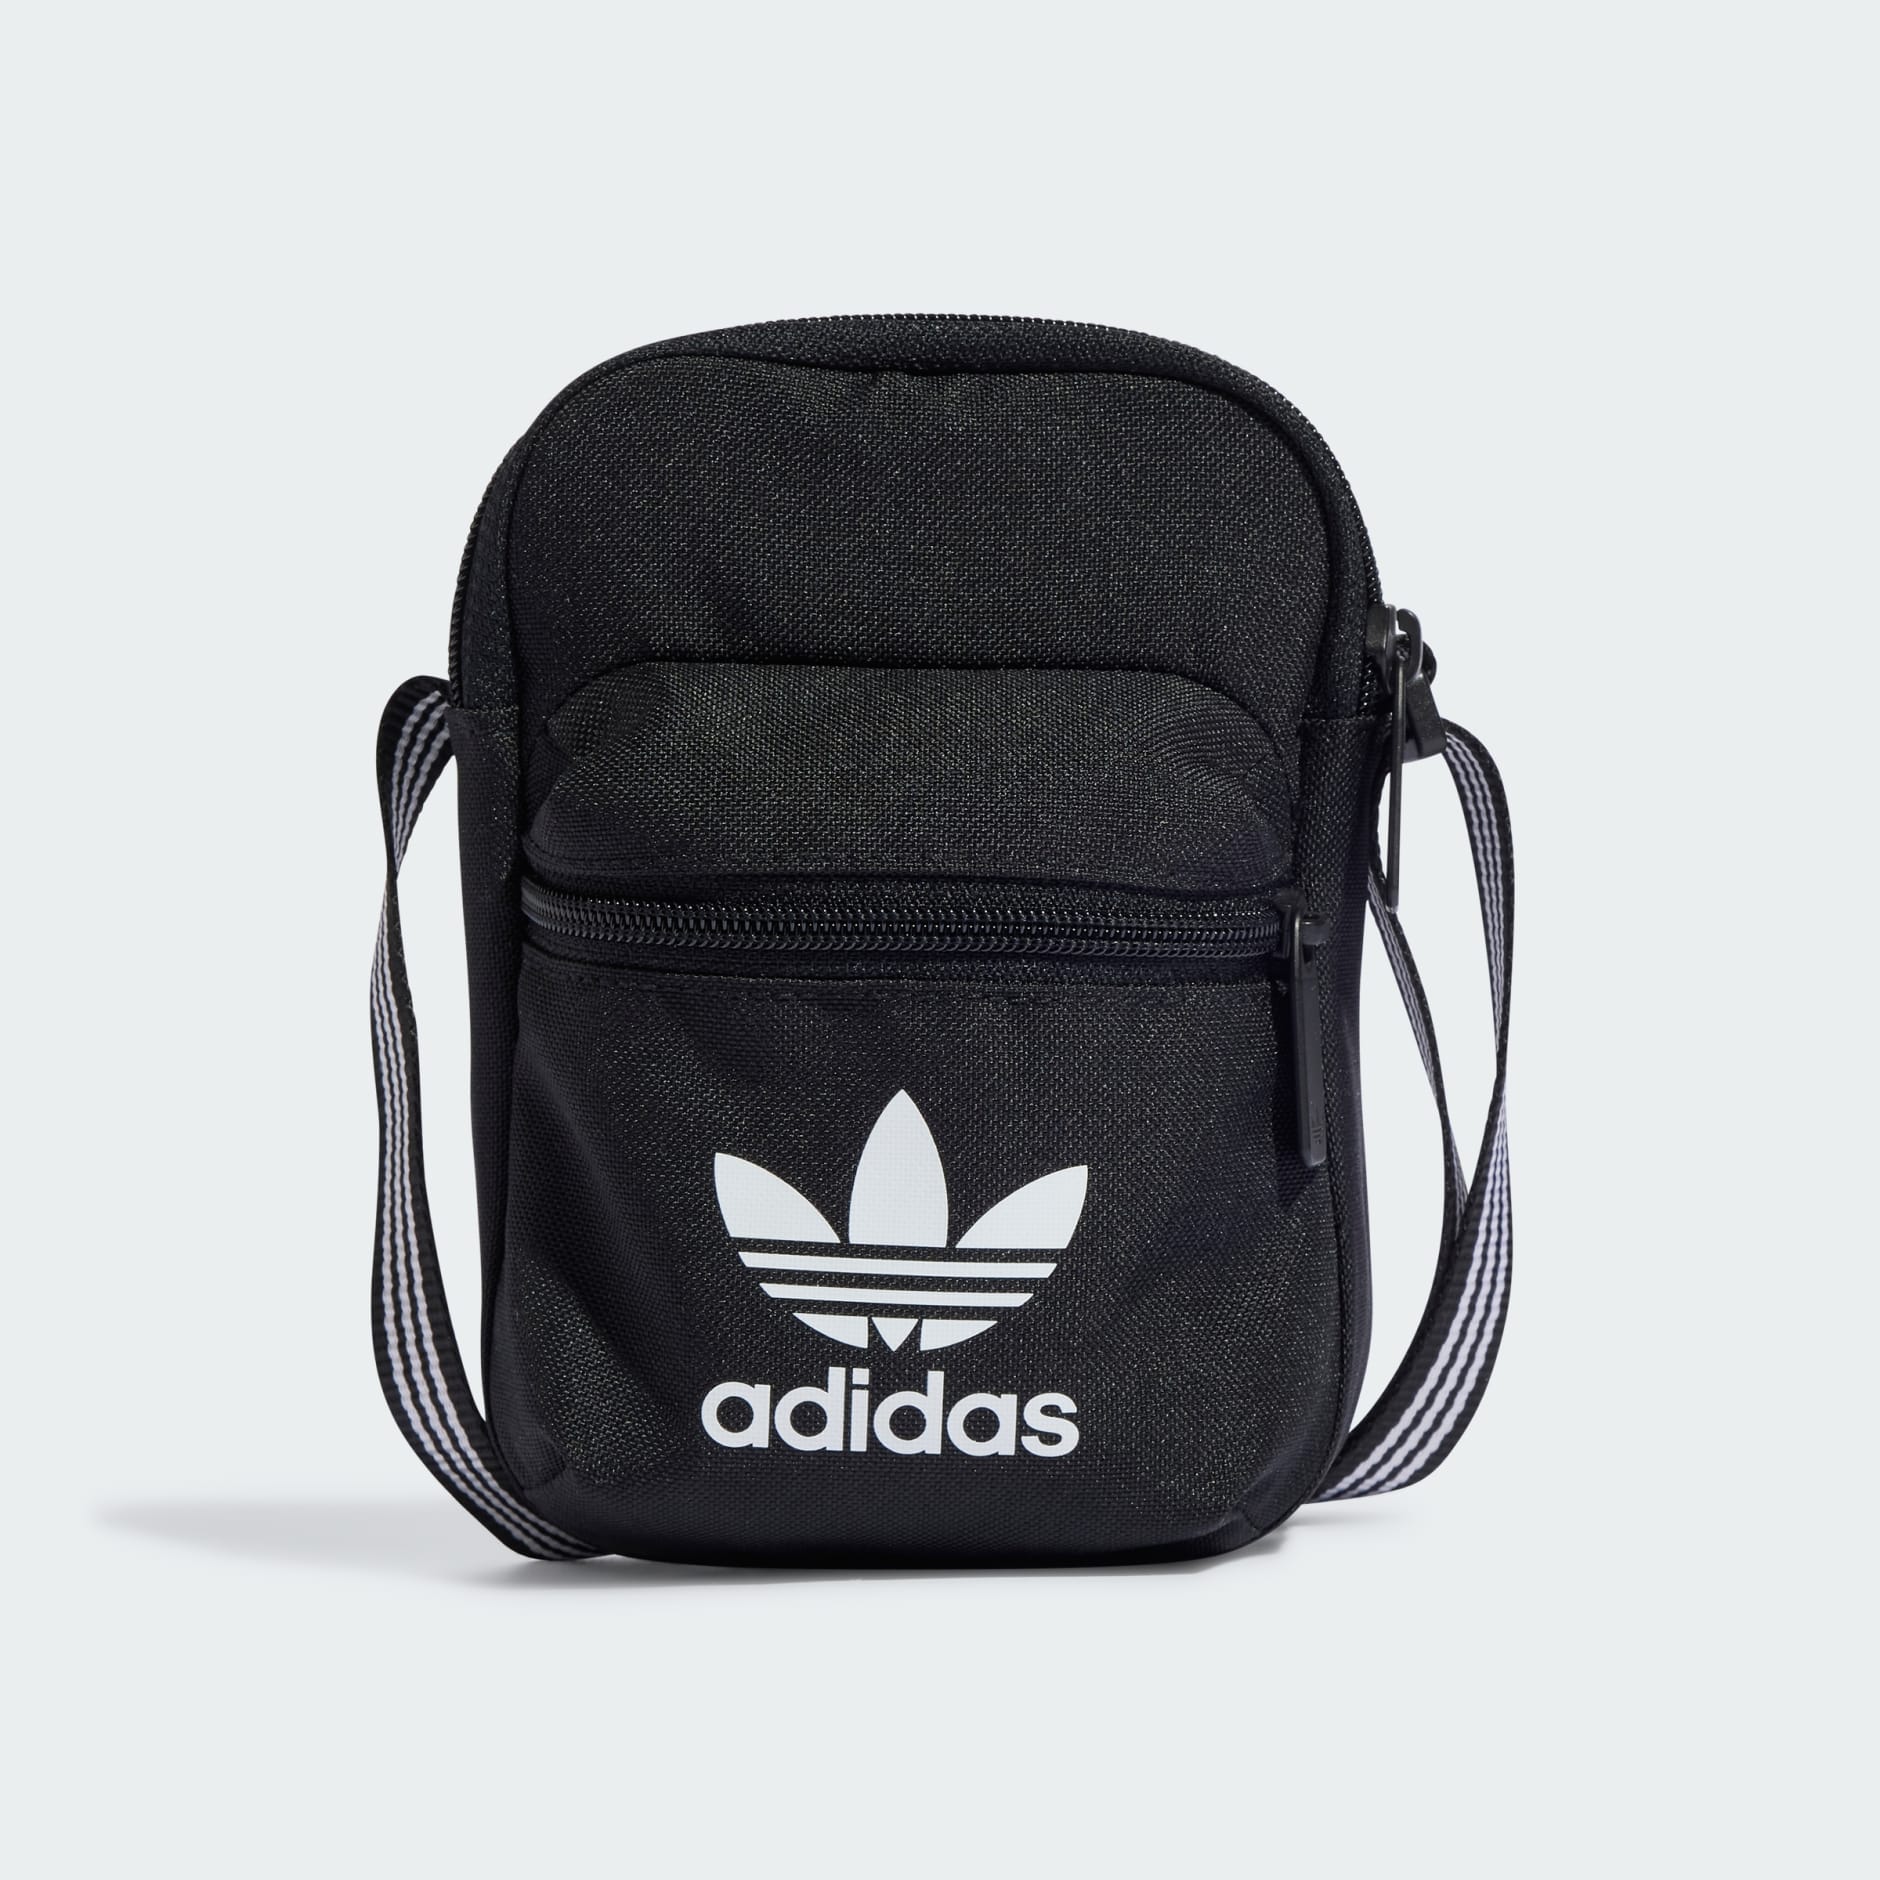 adidas book bag purse pattern size guide free ADIDAS Kids - IetpShops  Djibouti - adidas anime collab characters names for women